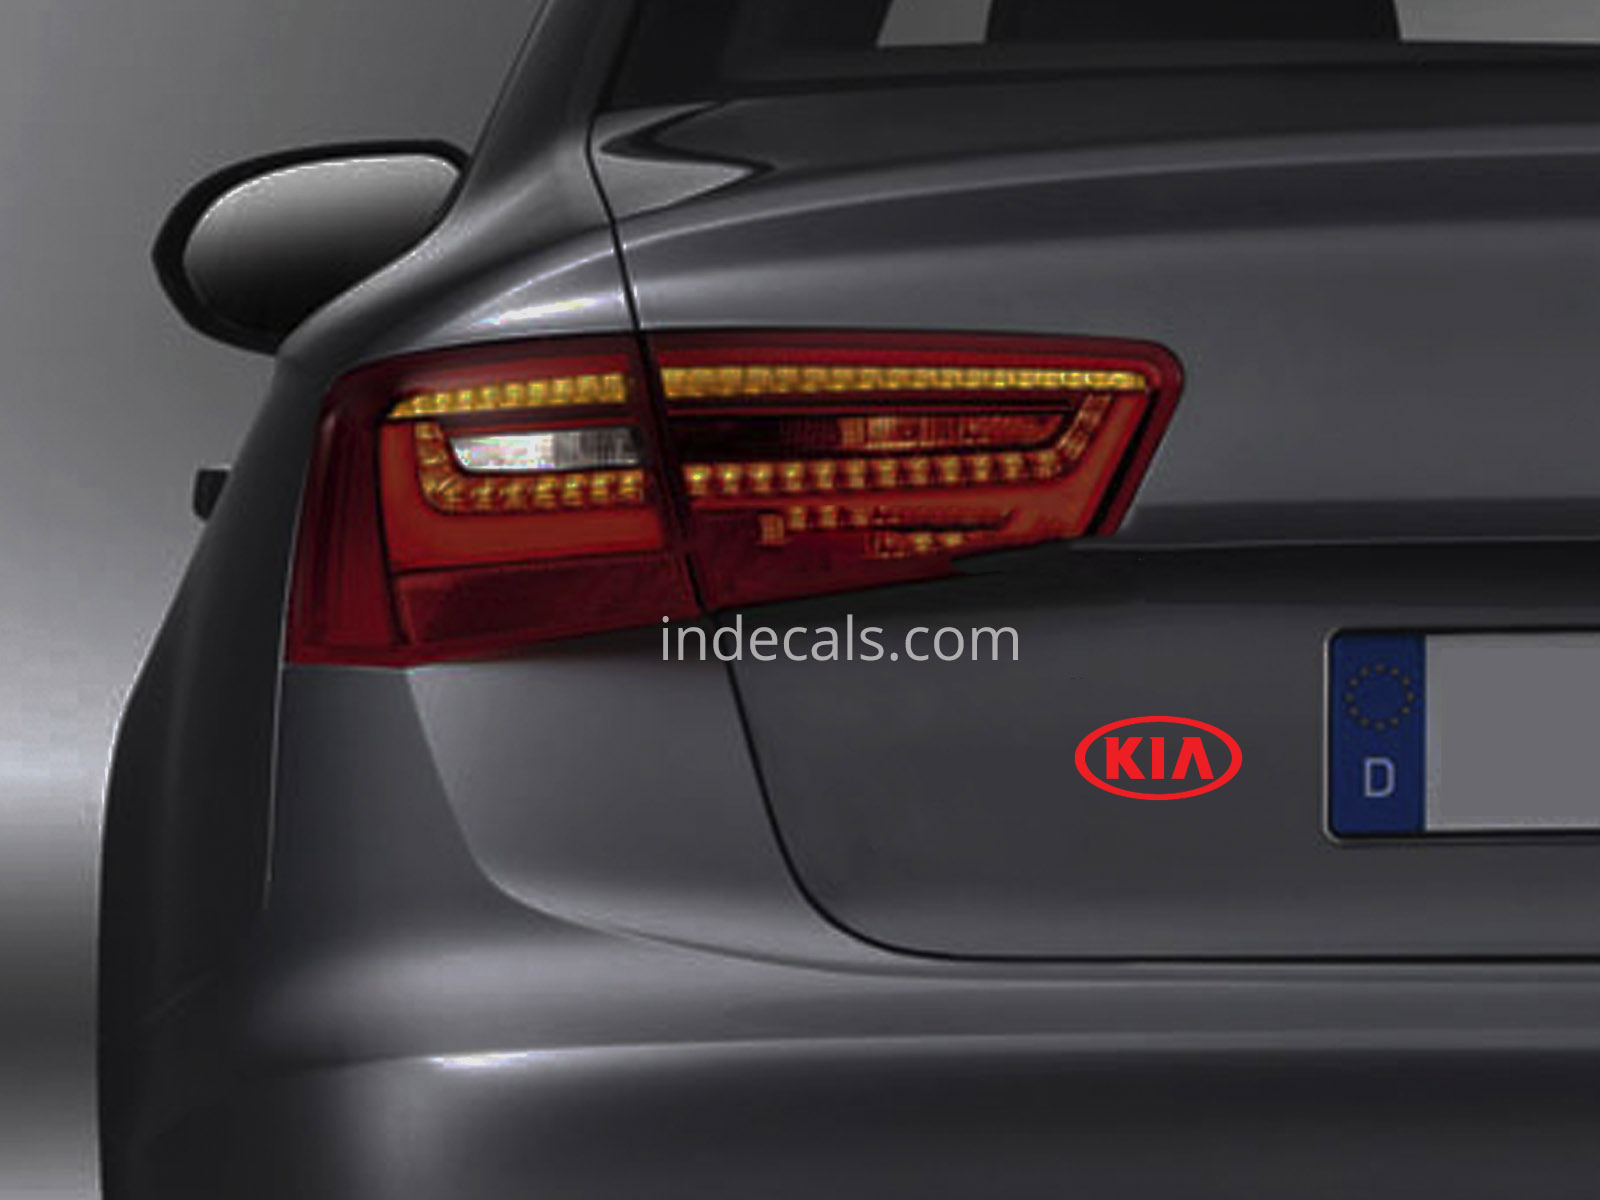 3 x KIA Stickers for Trunk - Red